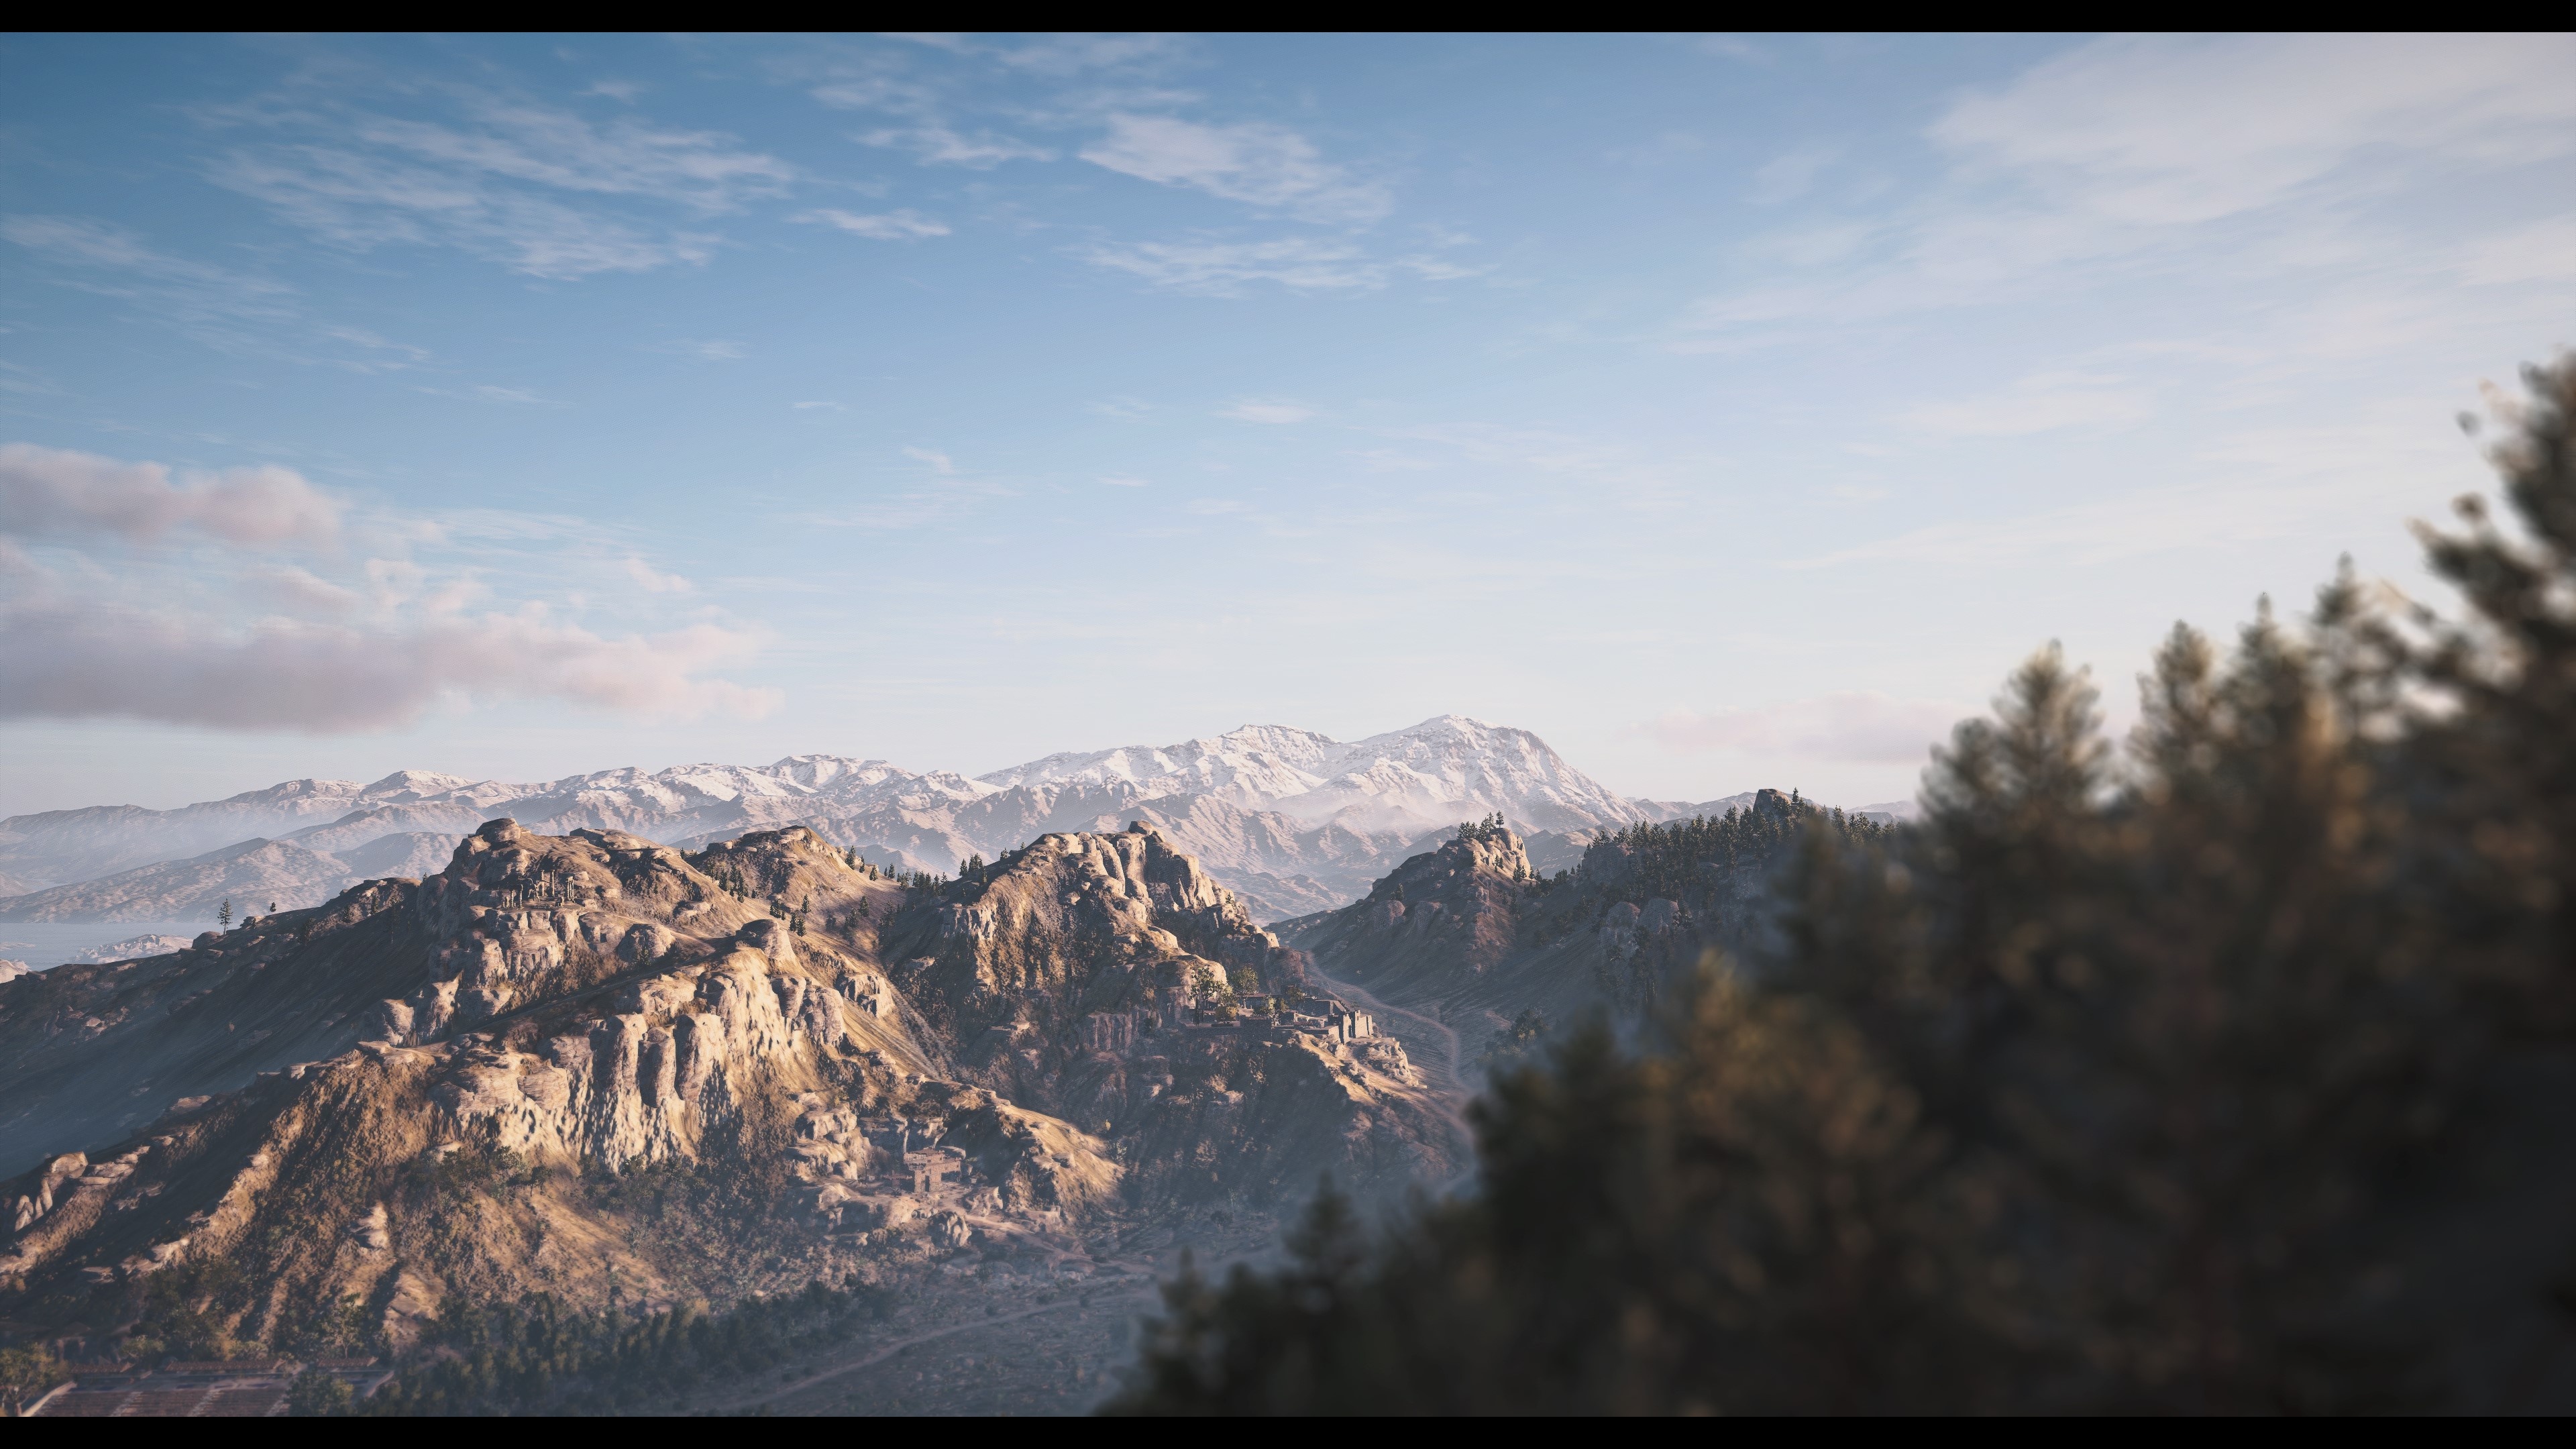 General 3840x2160 Assassins Creed: Odyssey HDR PC gaming reshade video games mountains nature CGI clouds sky